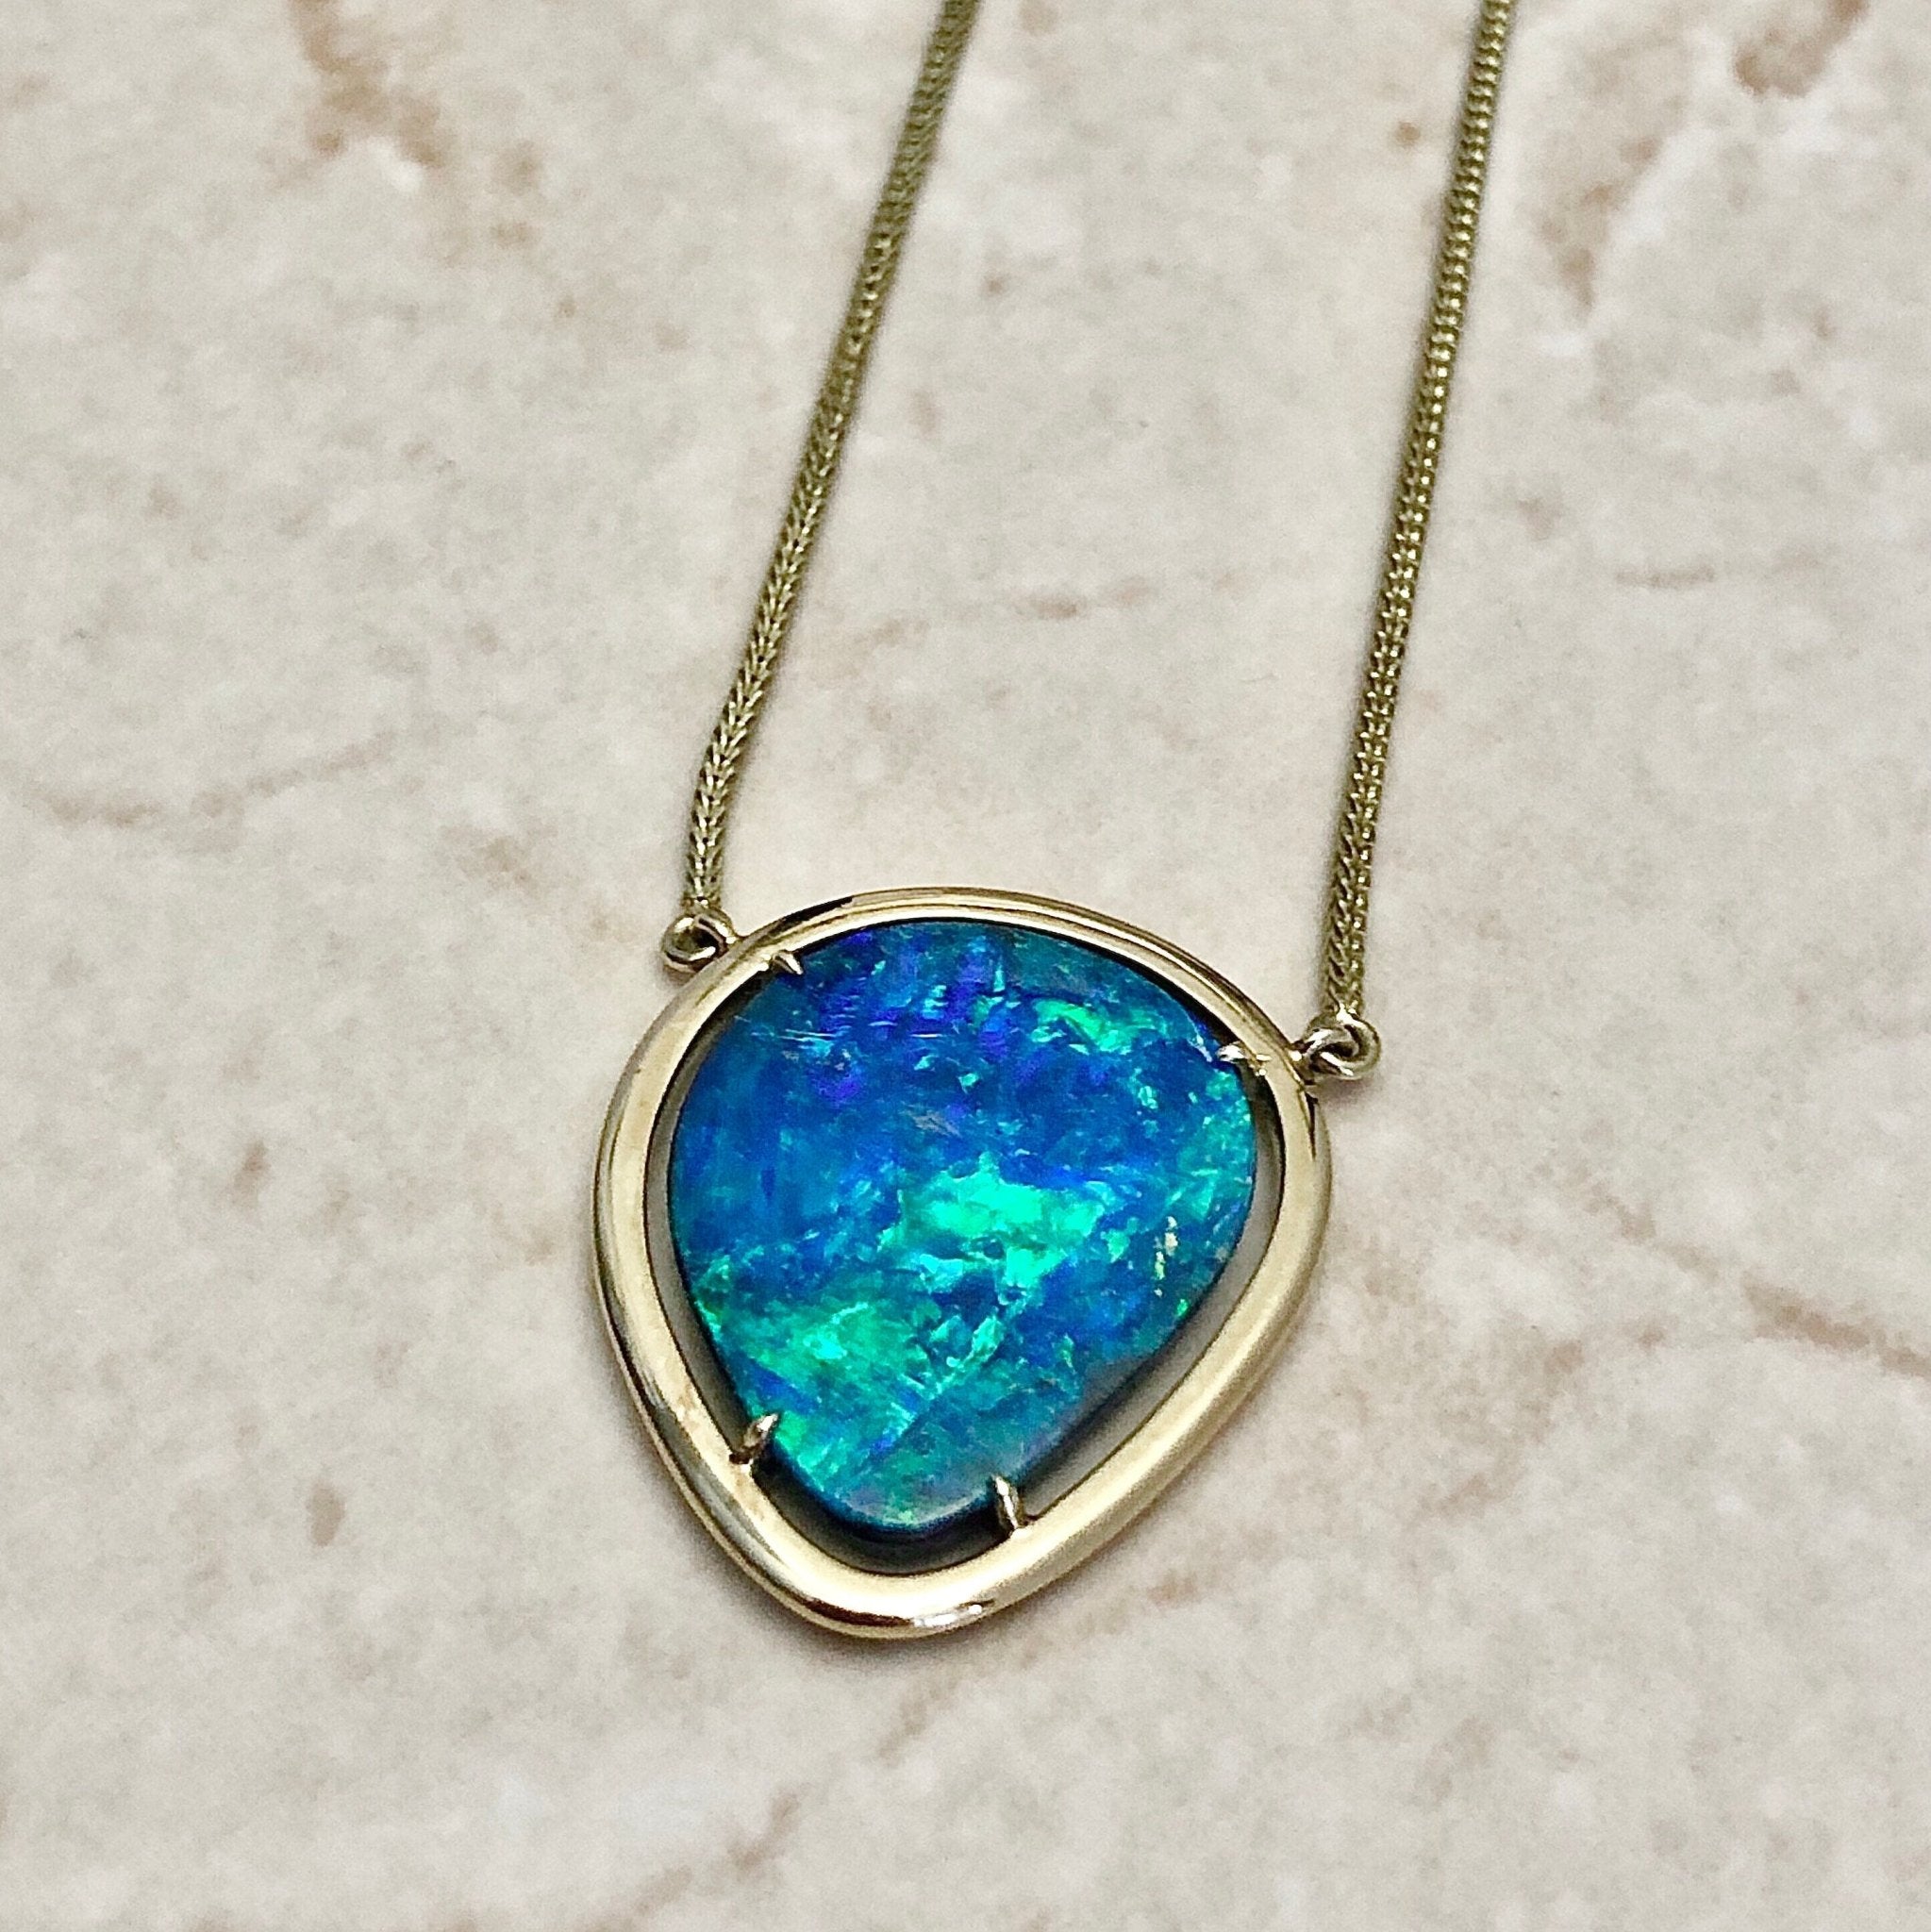 Real Opal Necklace By Gracie Collins | notonthehighstreet.com